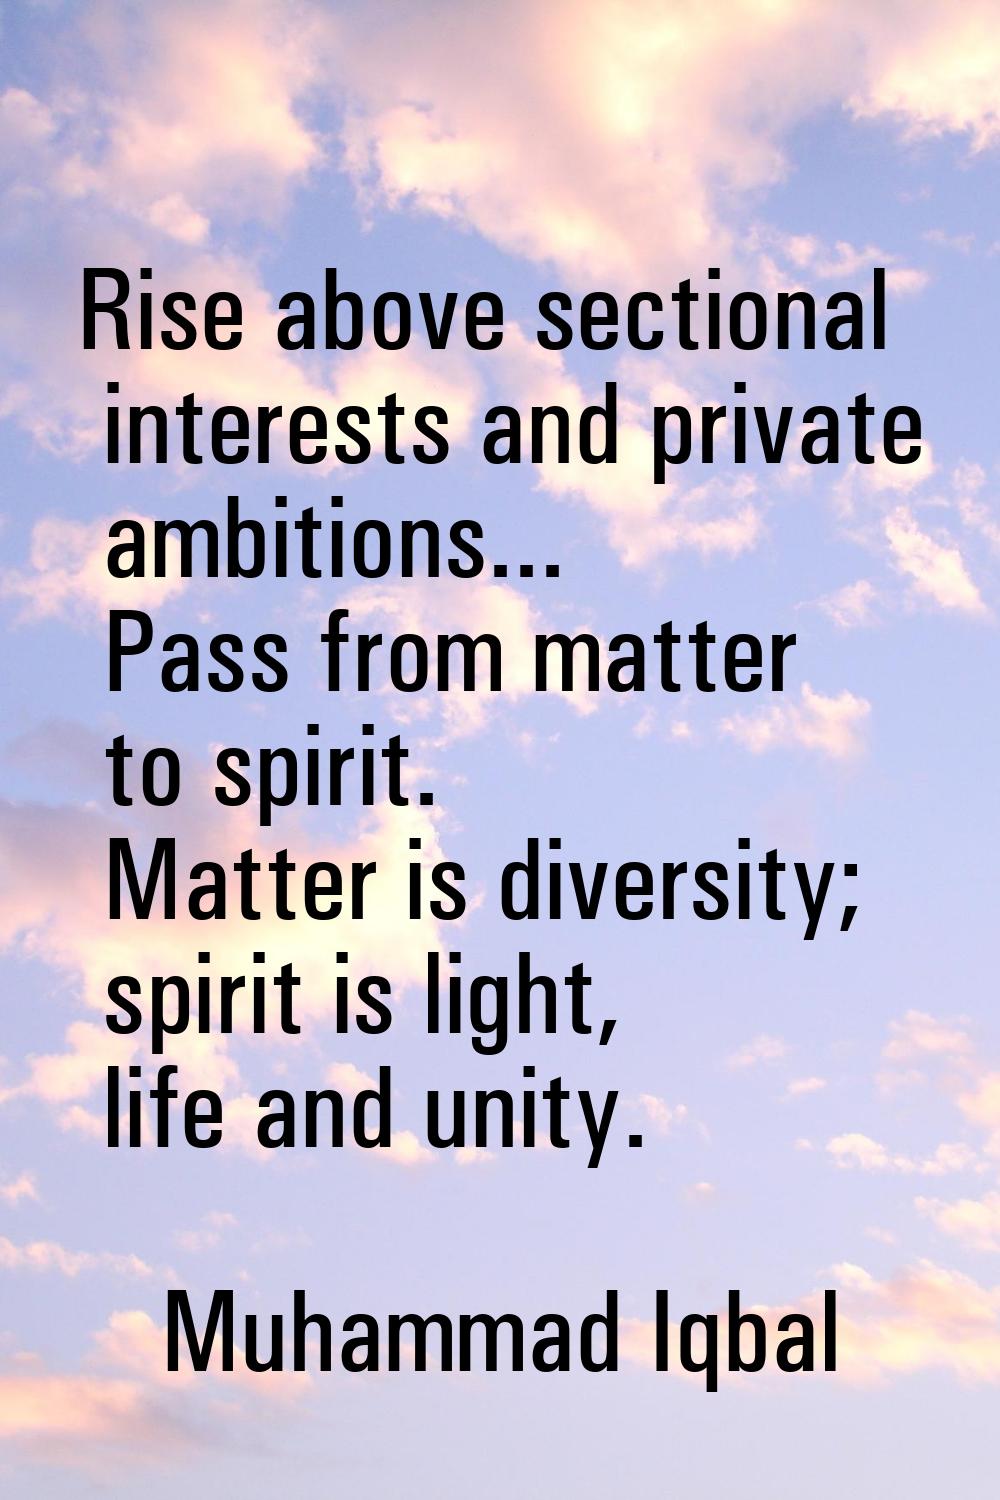 Rise above sectional interests and private ambitions... Pass from matter to spirit. Matter is diver